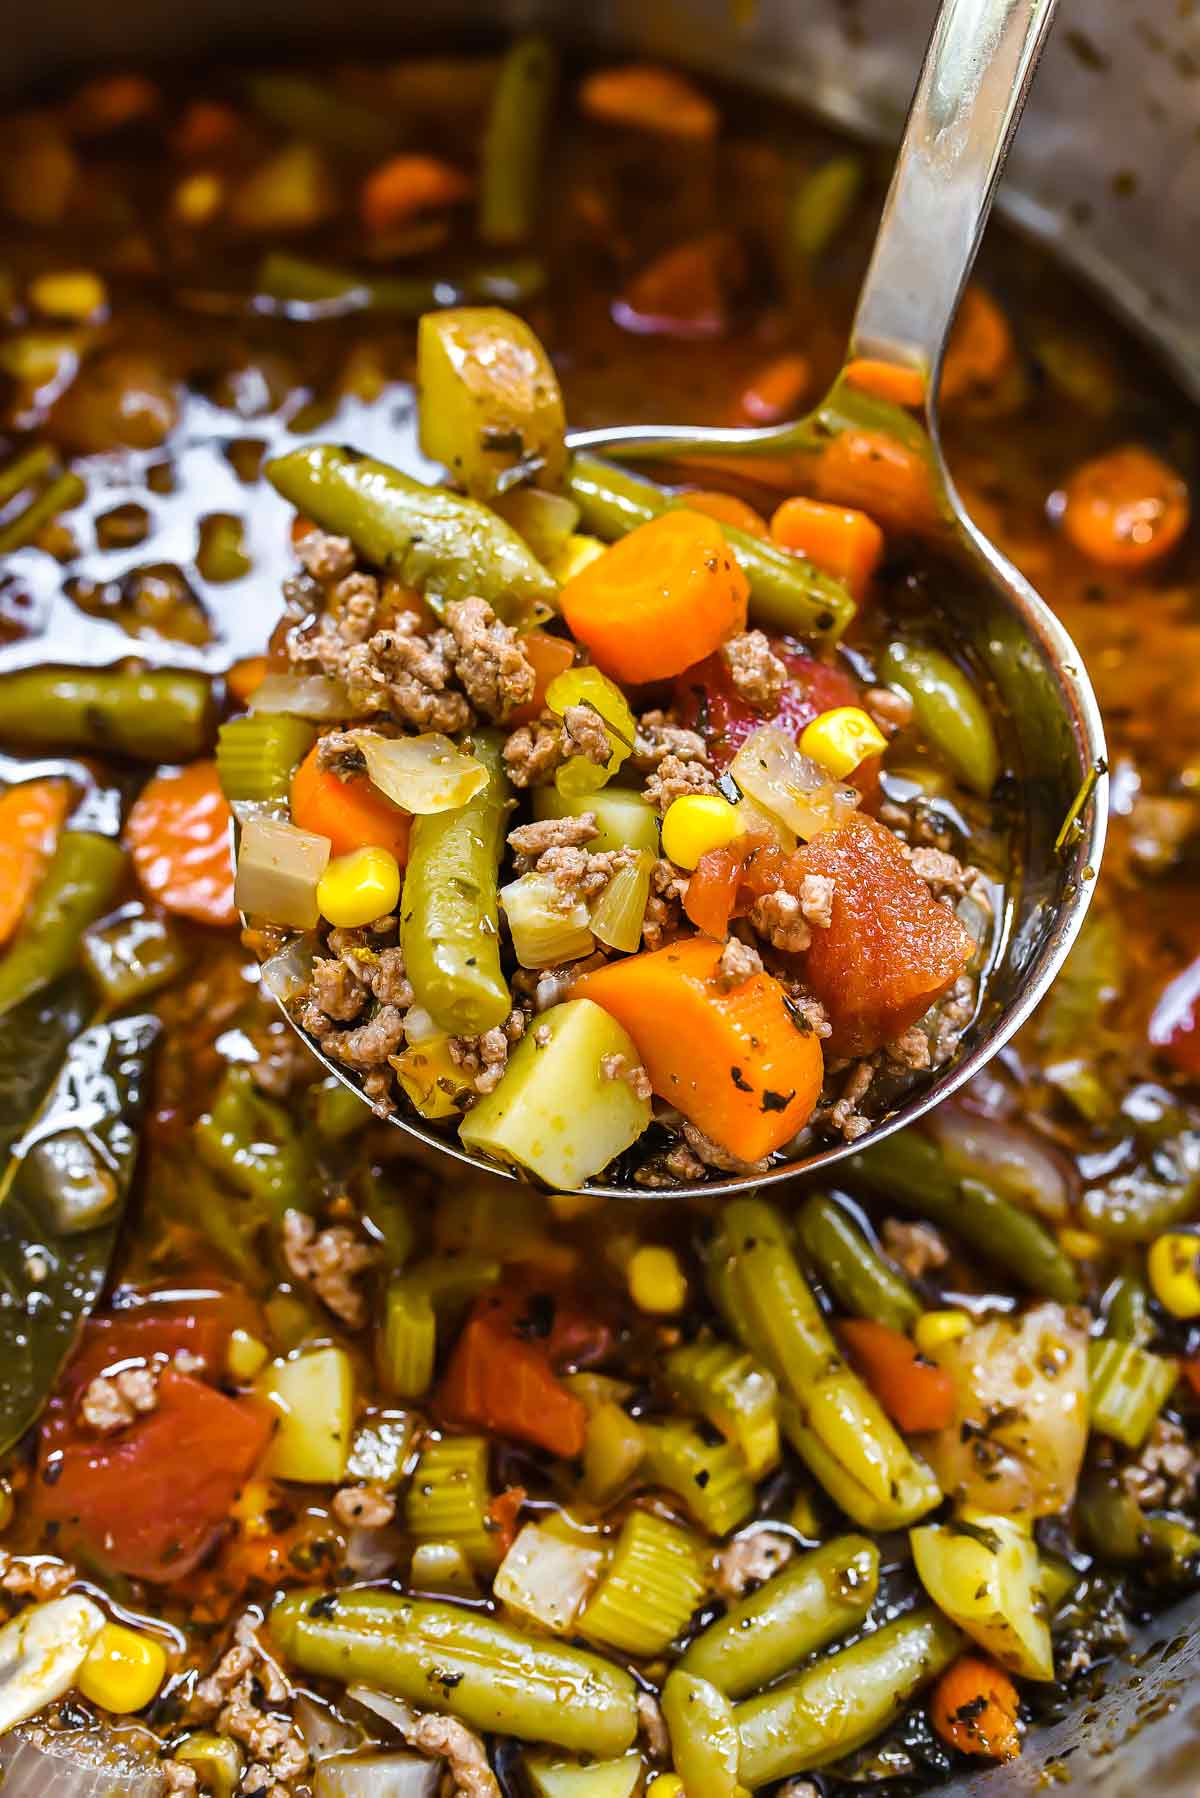 Easy Hamburger Soup with Vegetables | foodiecrush.com